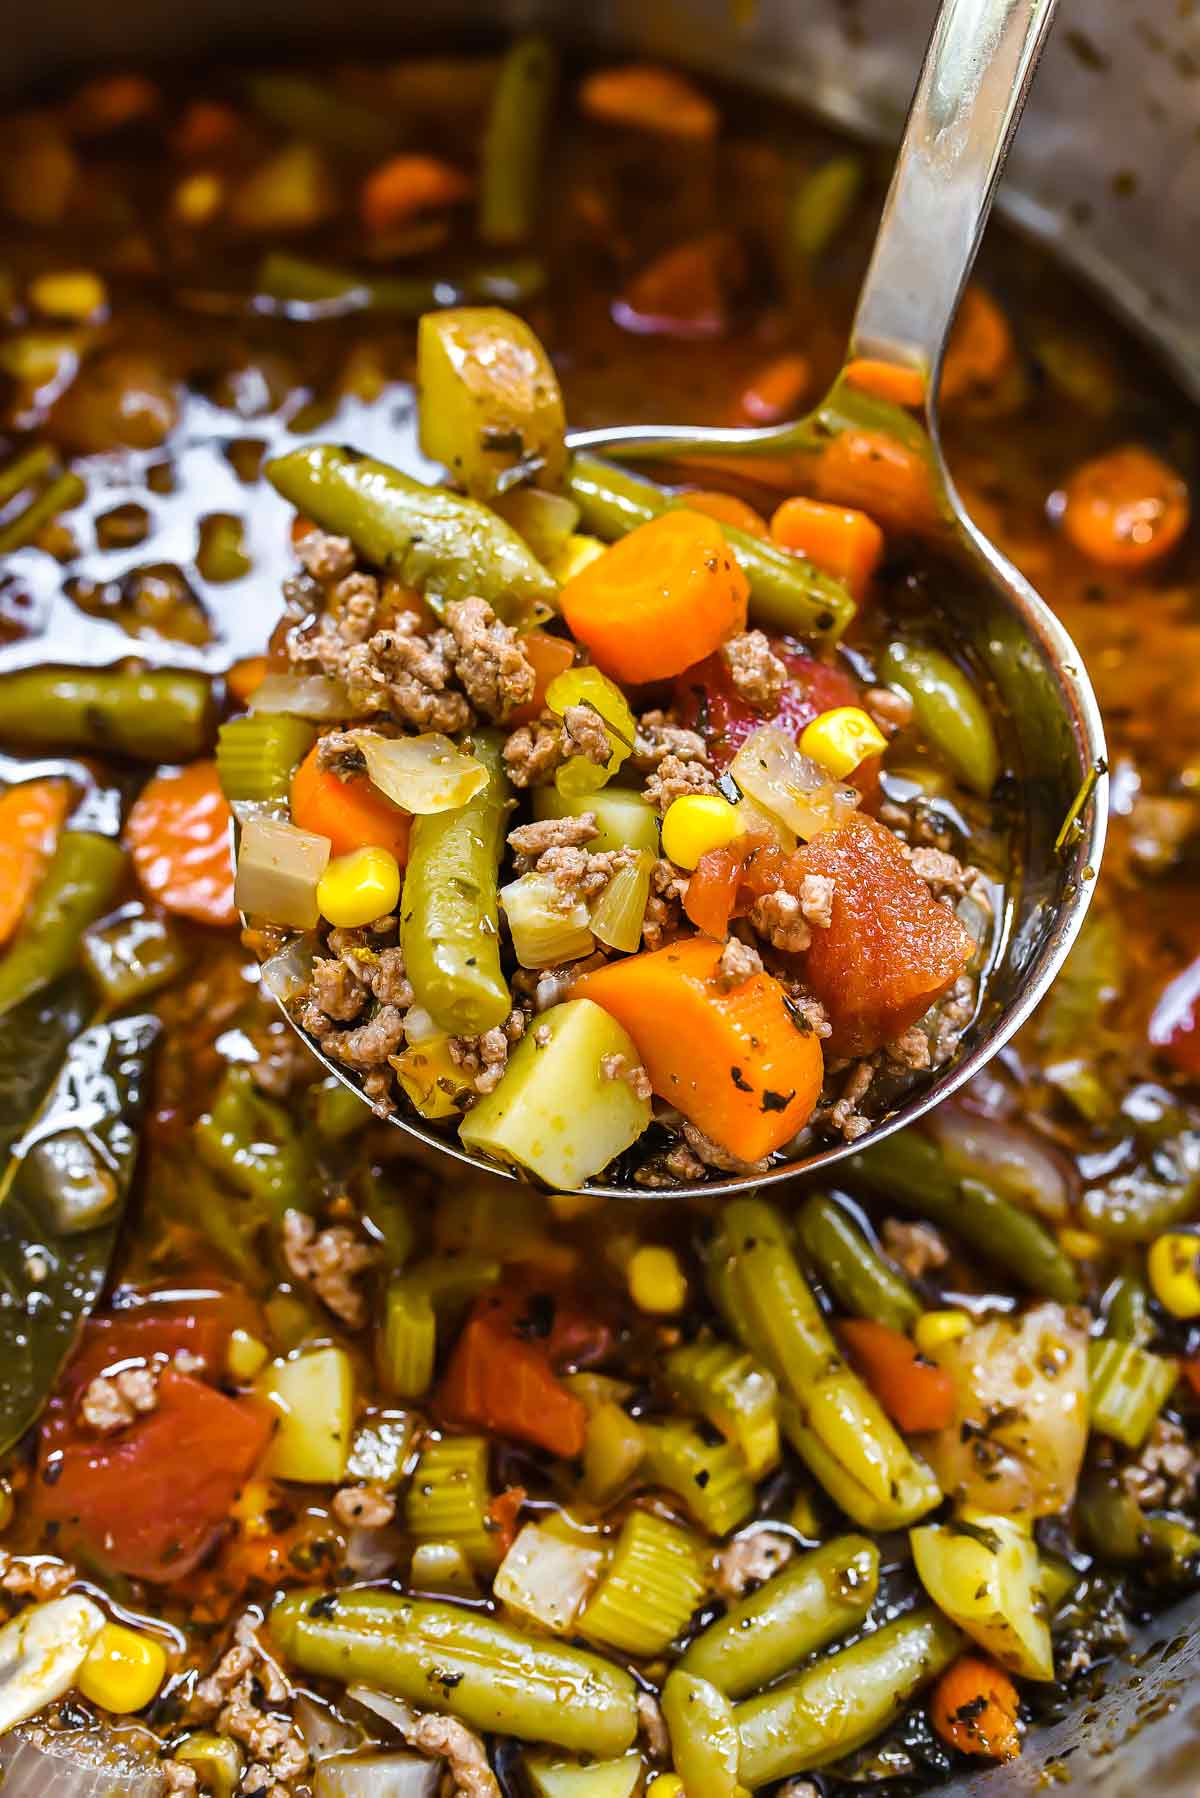 Easy Hamburger Soup with Vegetables | foodiecrush.com